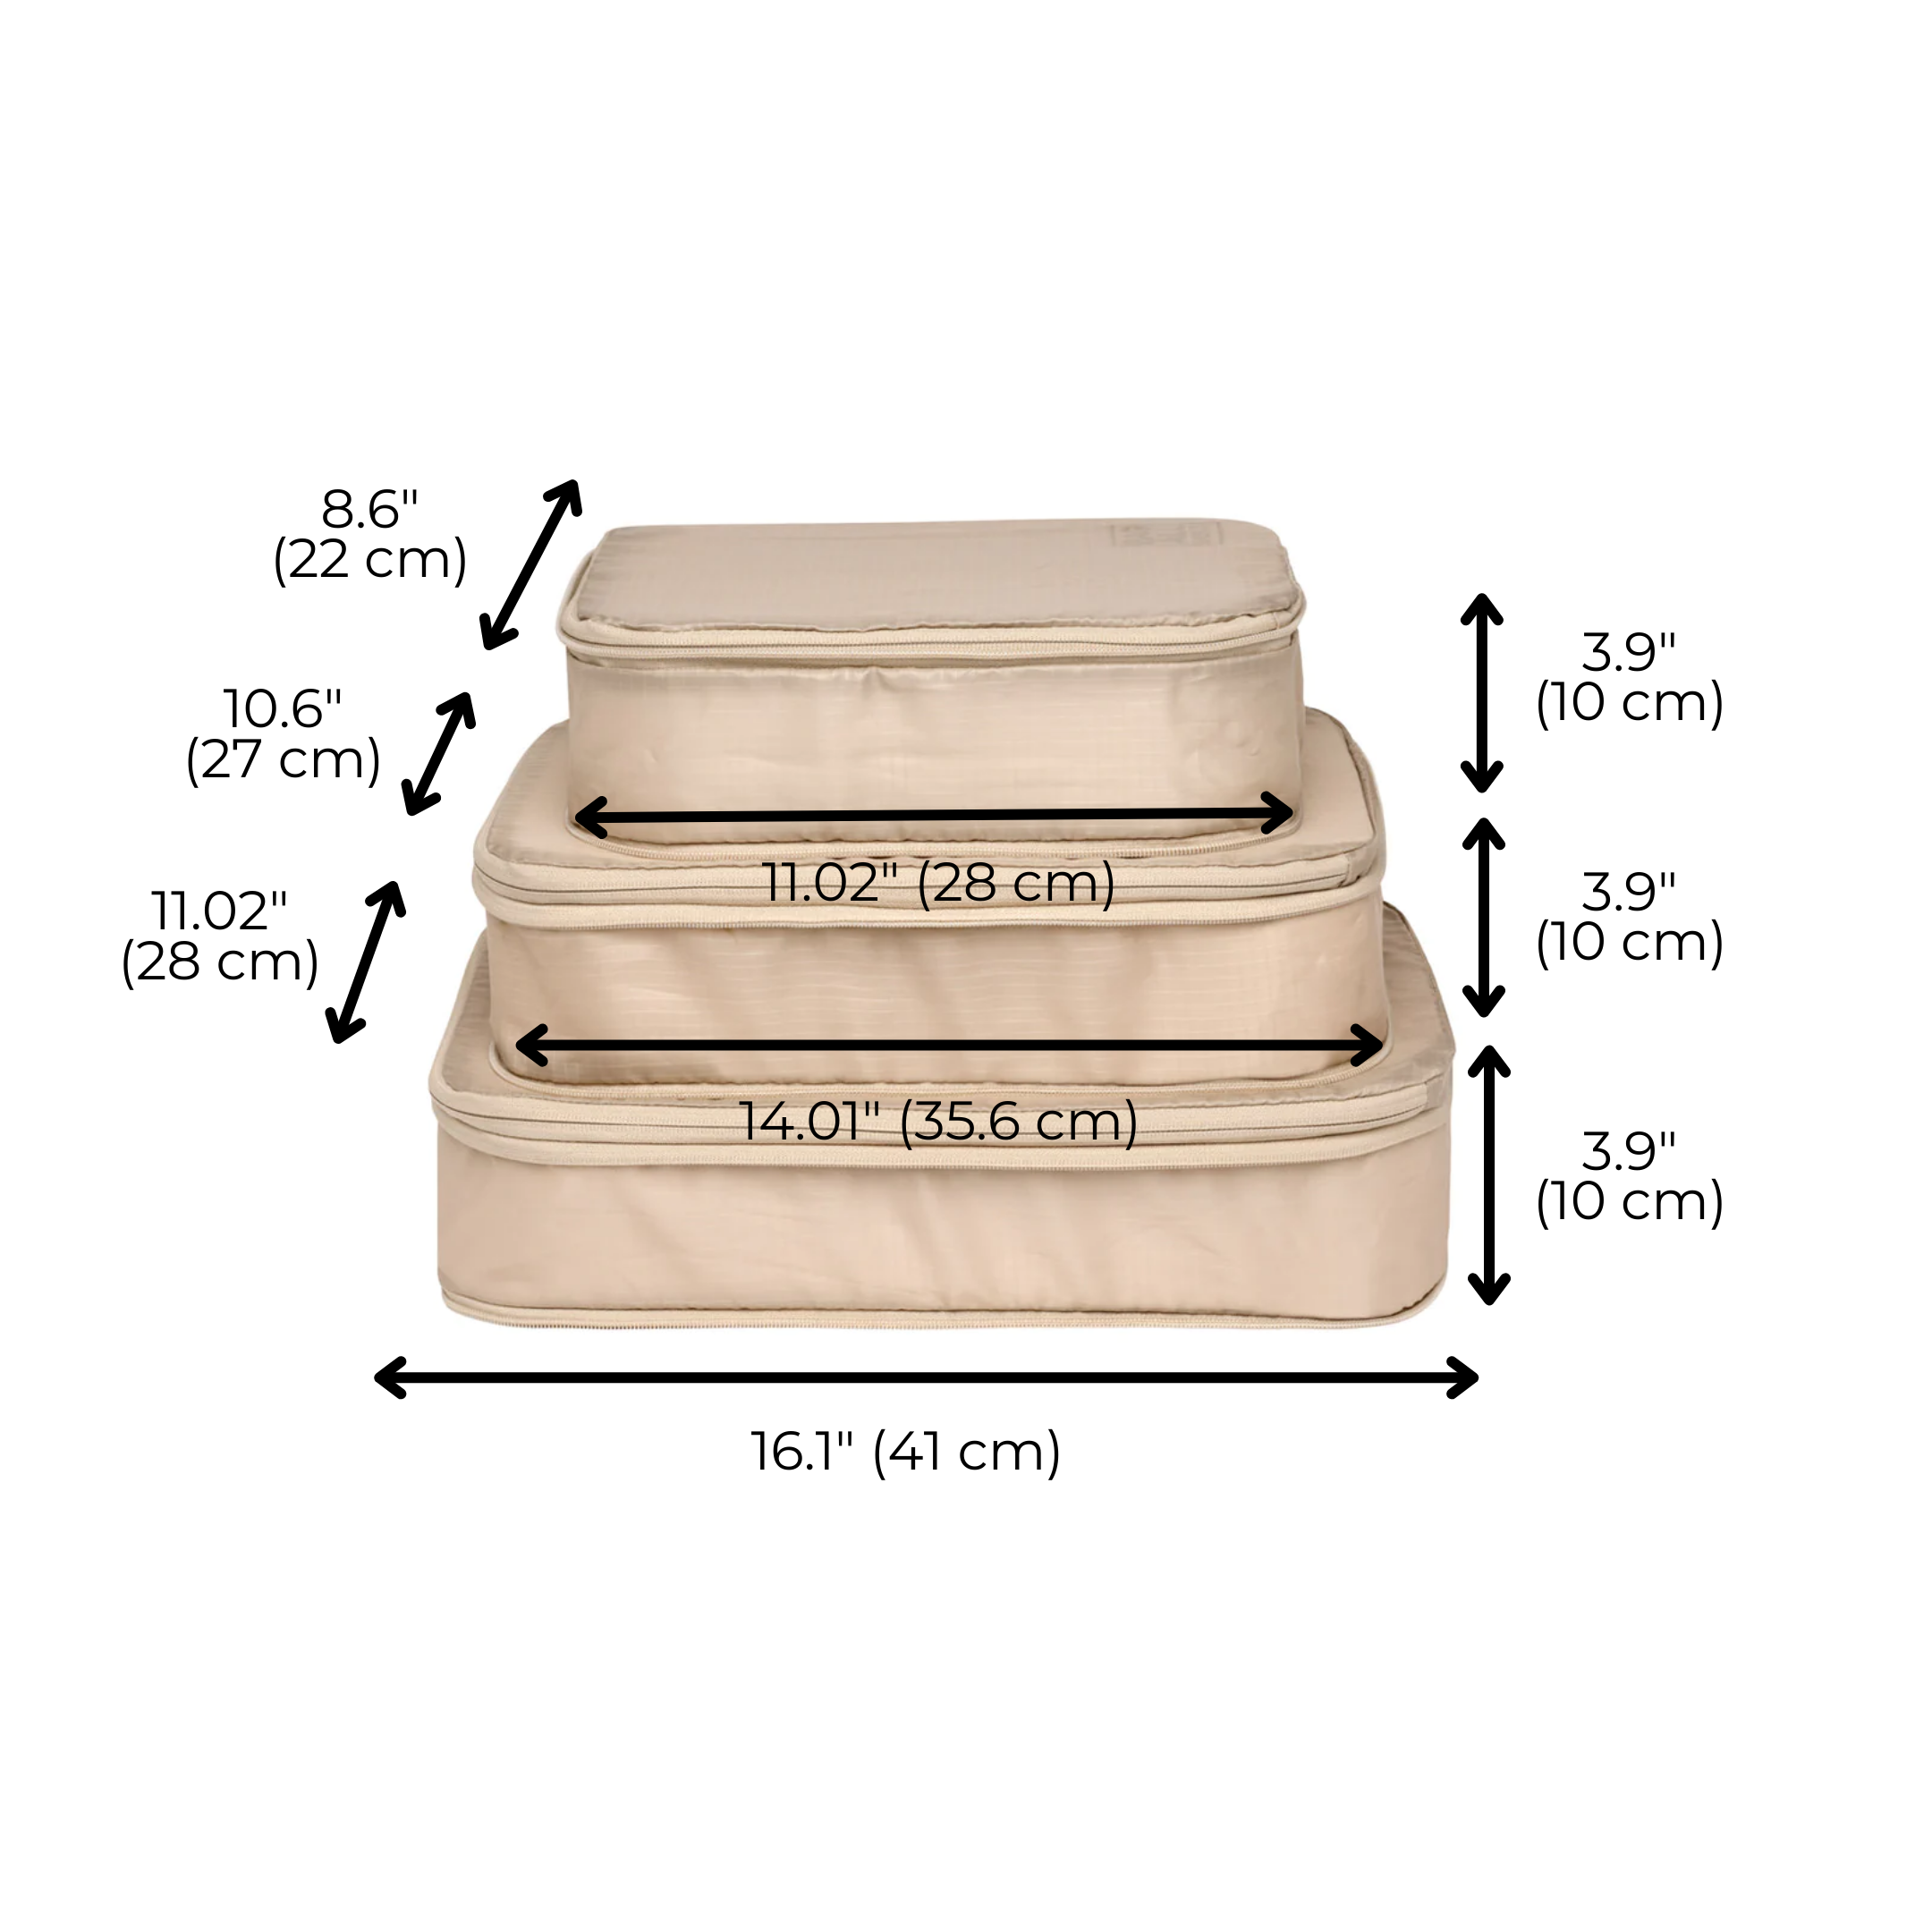 Re-cycled and Reinforced Nylon Compression Packing Cubes, 3-pack Taupe | Bag-all